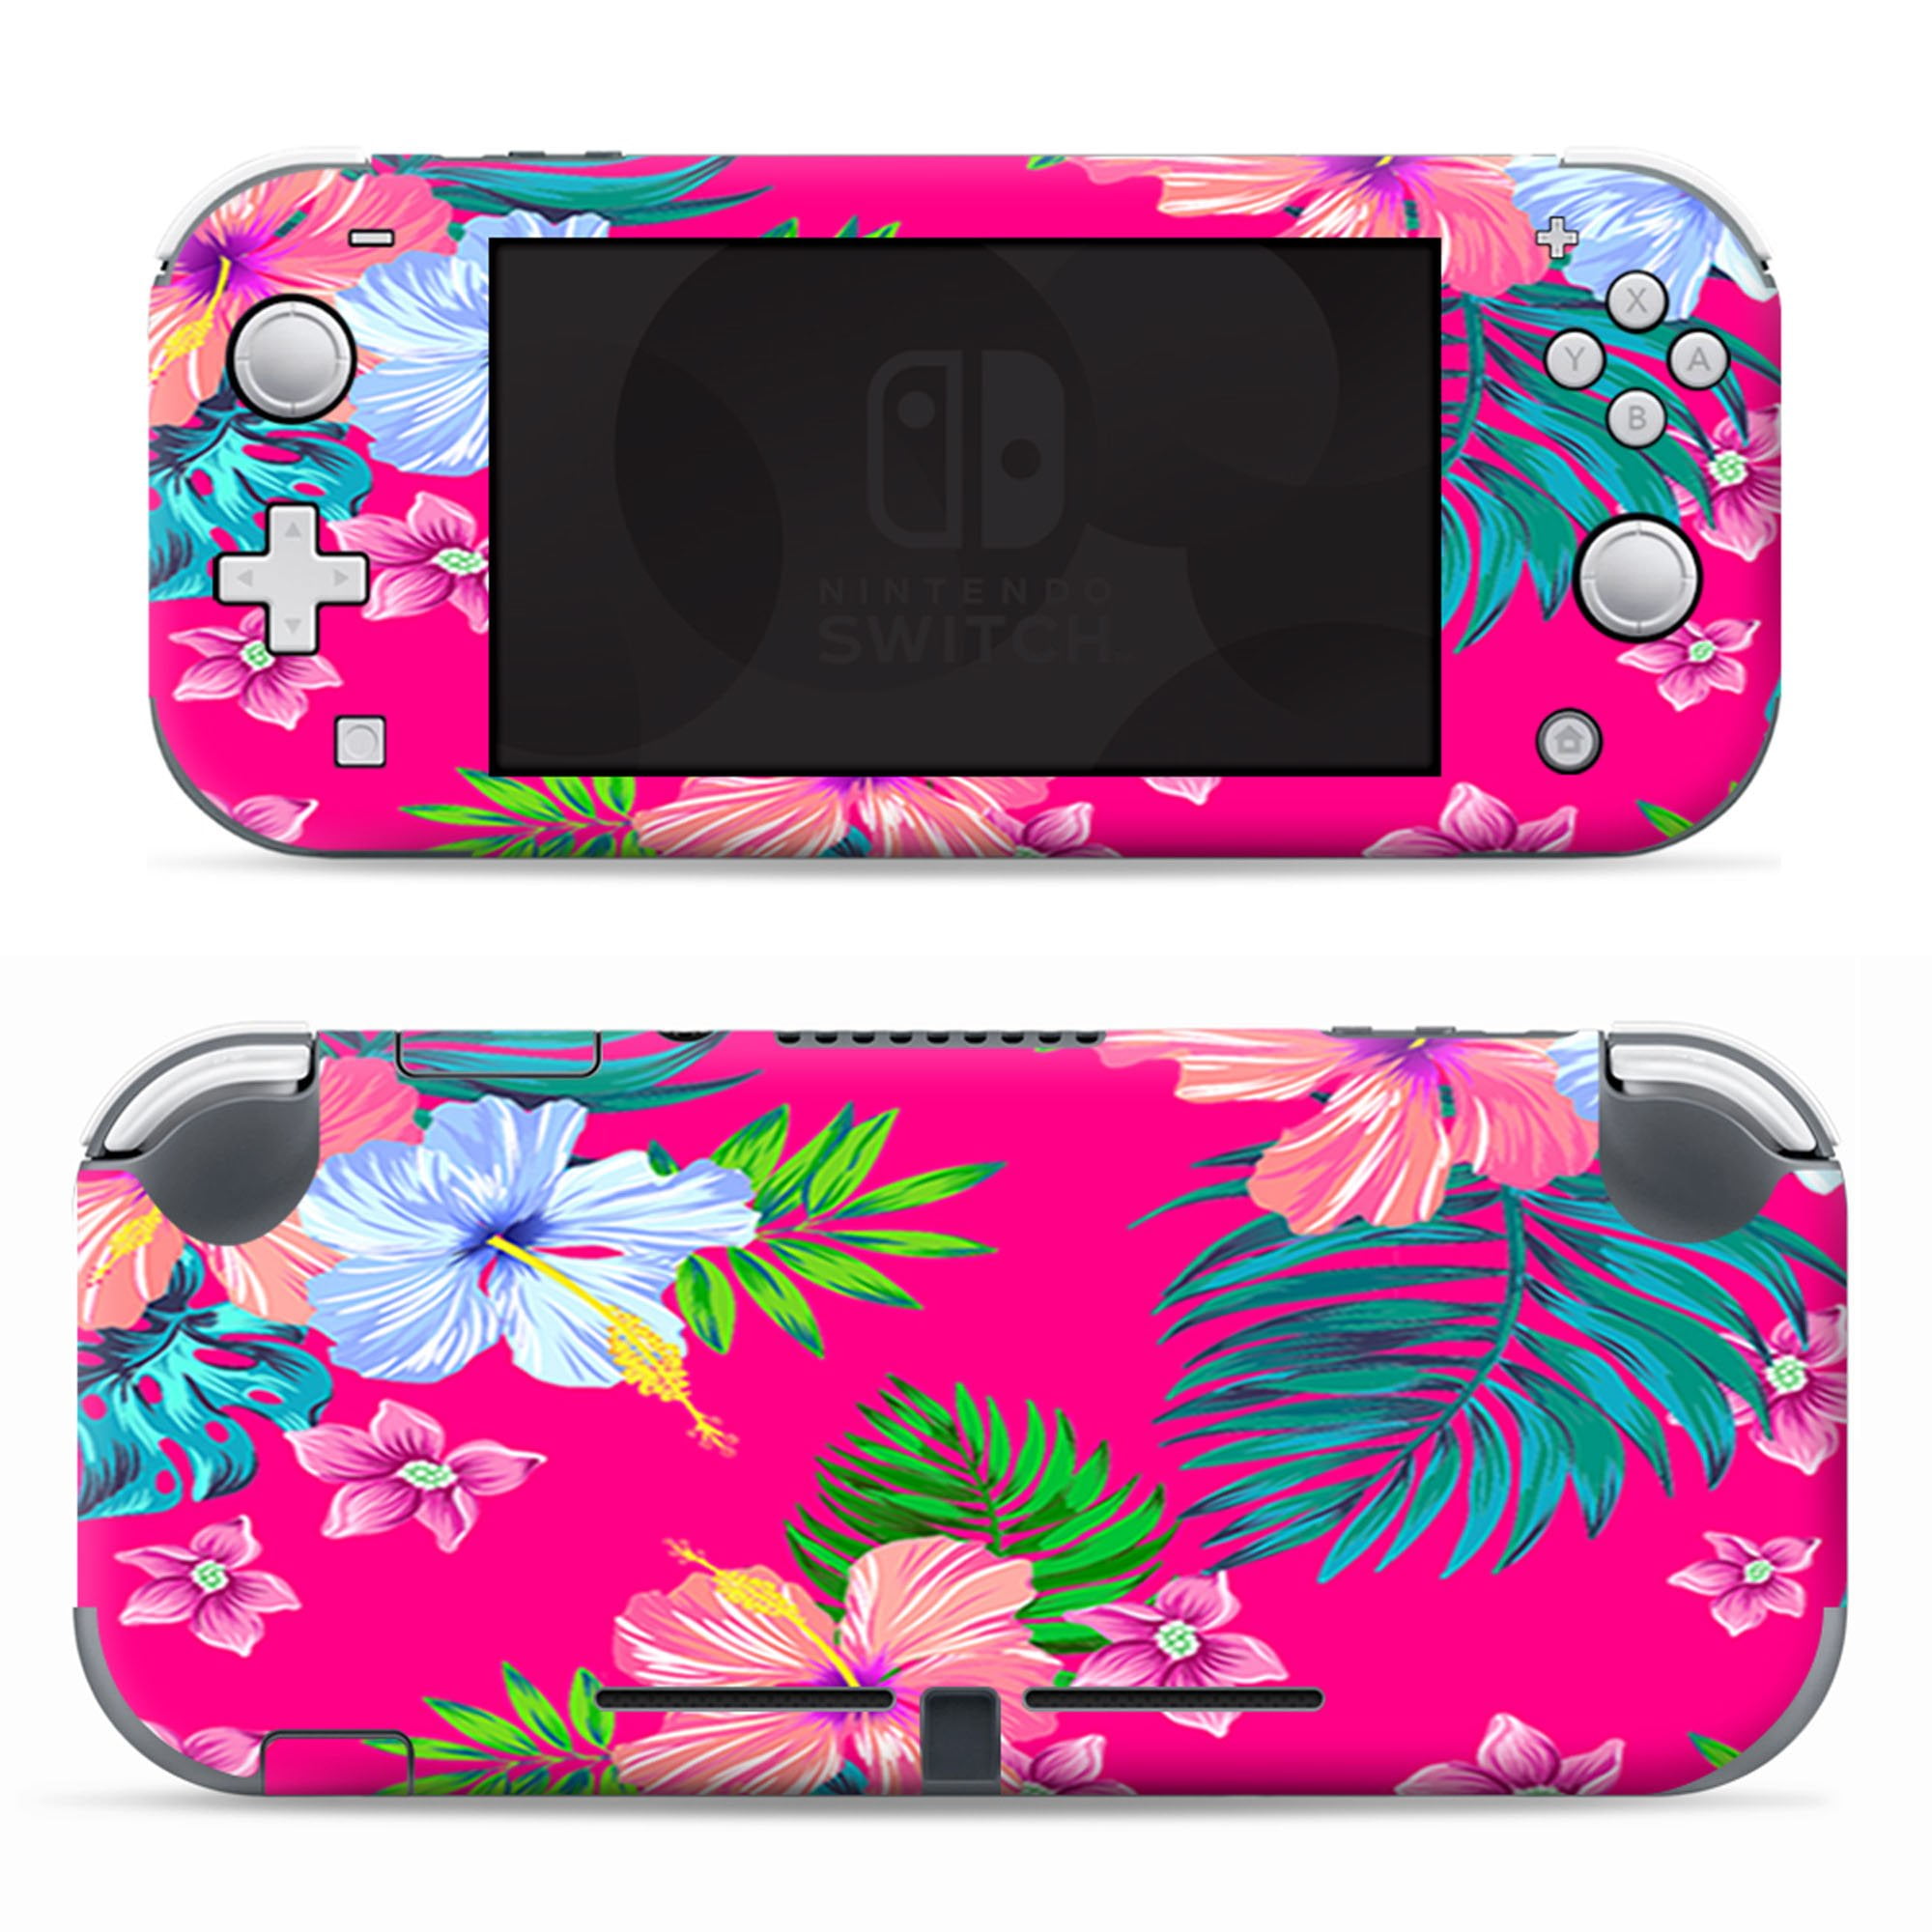 Nintendo Switch Lite Skins Decals Vinyl Wrap decal stickers skins cover Pink Neon Hibiscus